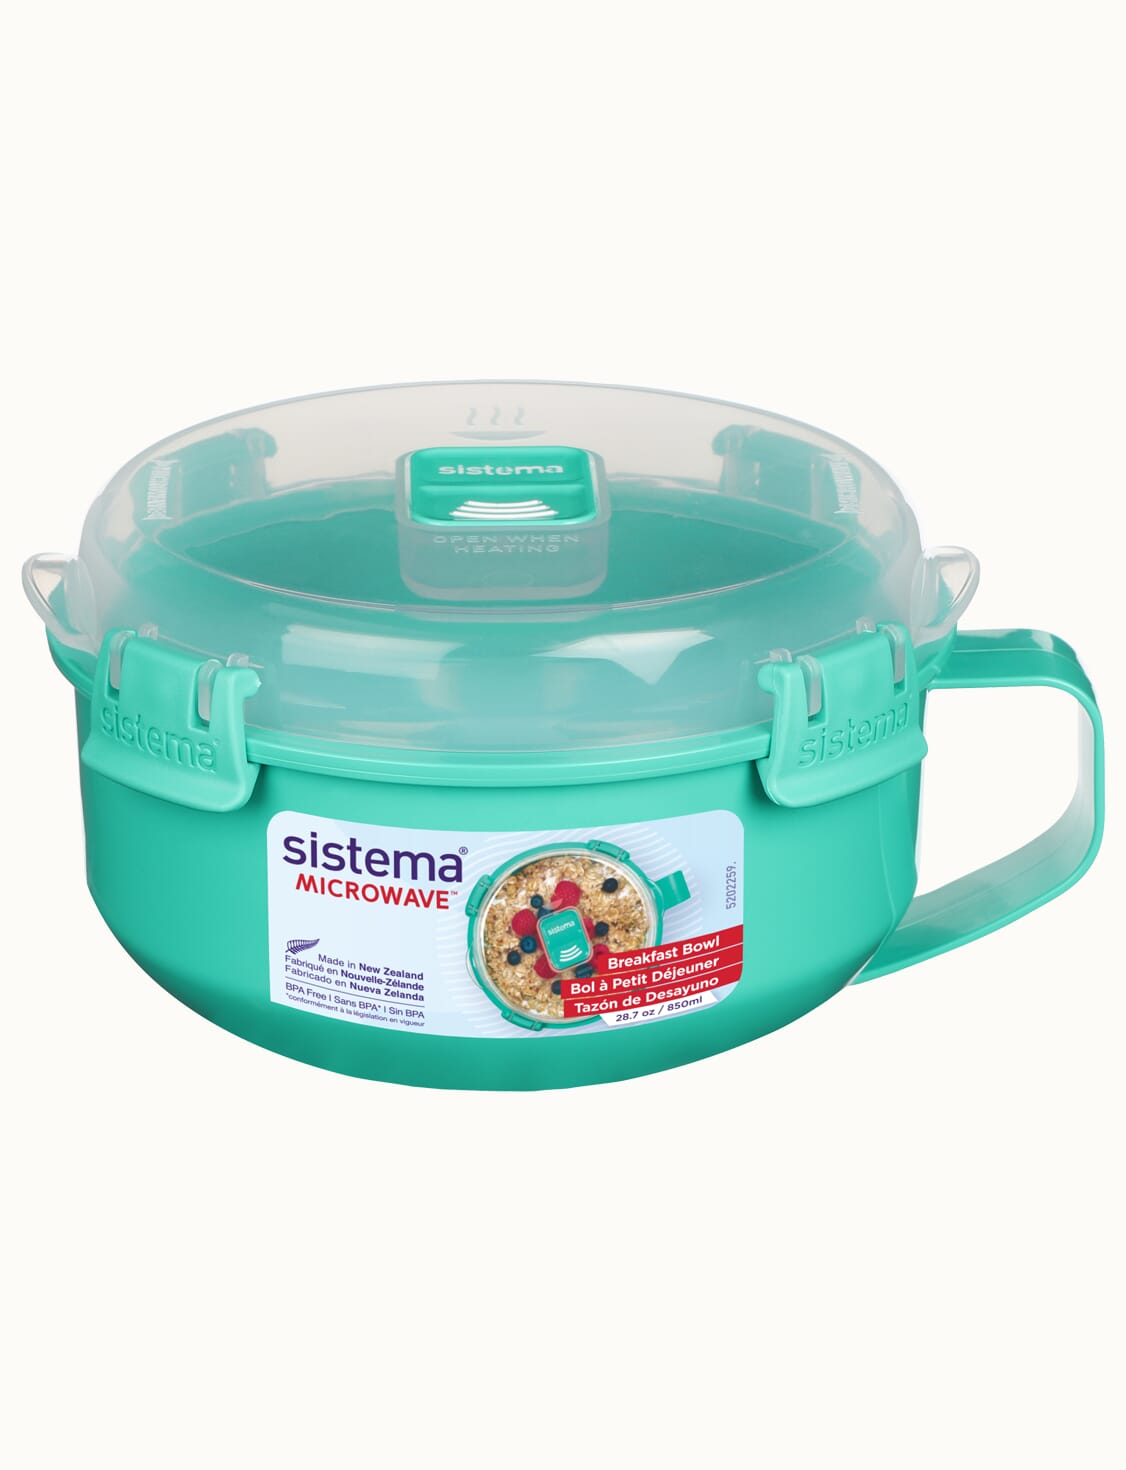 https://stergita.sirv.com/sistema/catalog/product/2/1/21112_850ml_microwave_breakfast_angle_label_mintyteal.png?canvas.color=fcfbf8